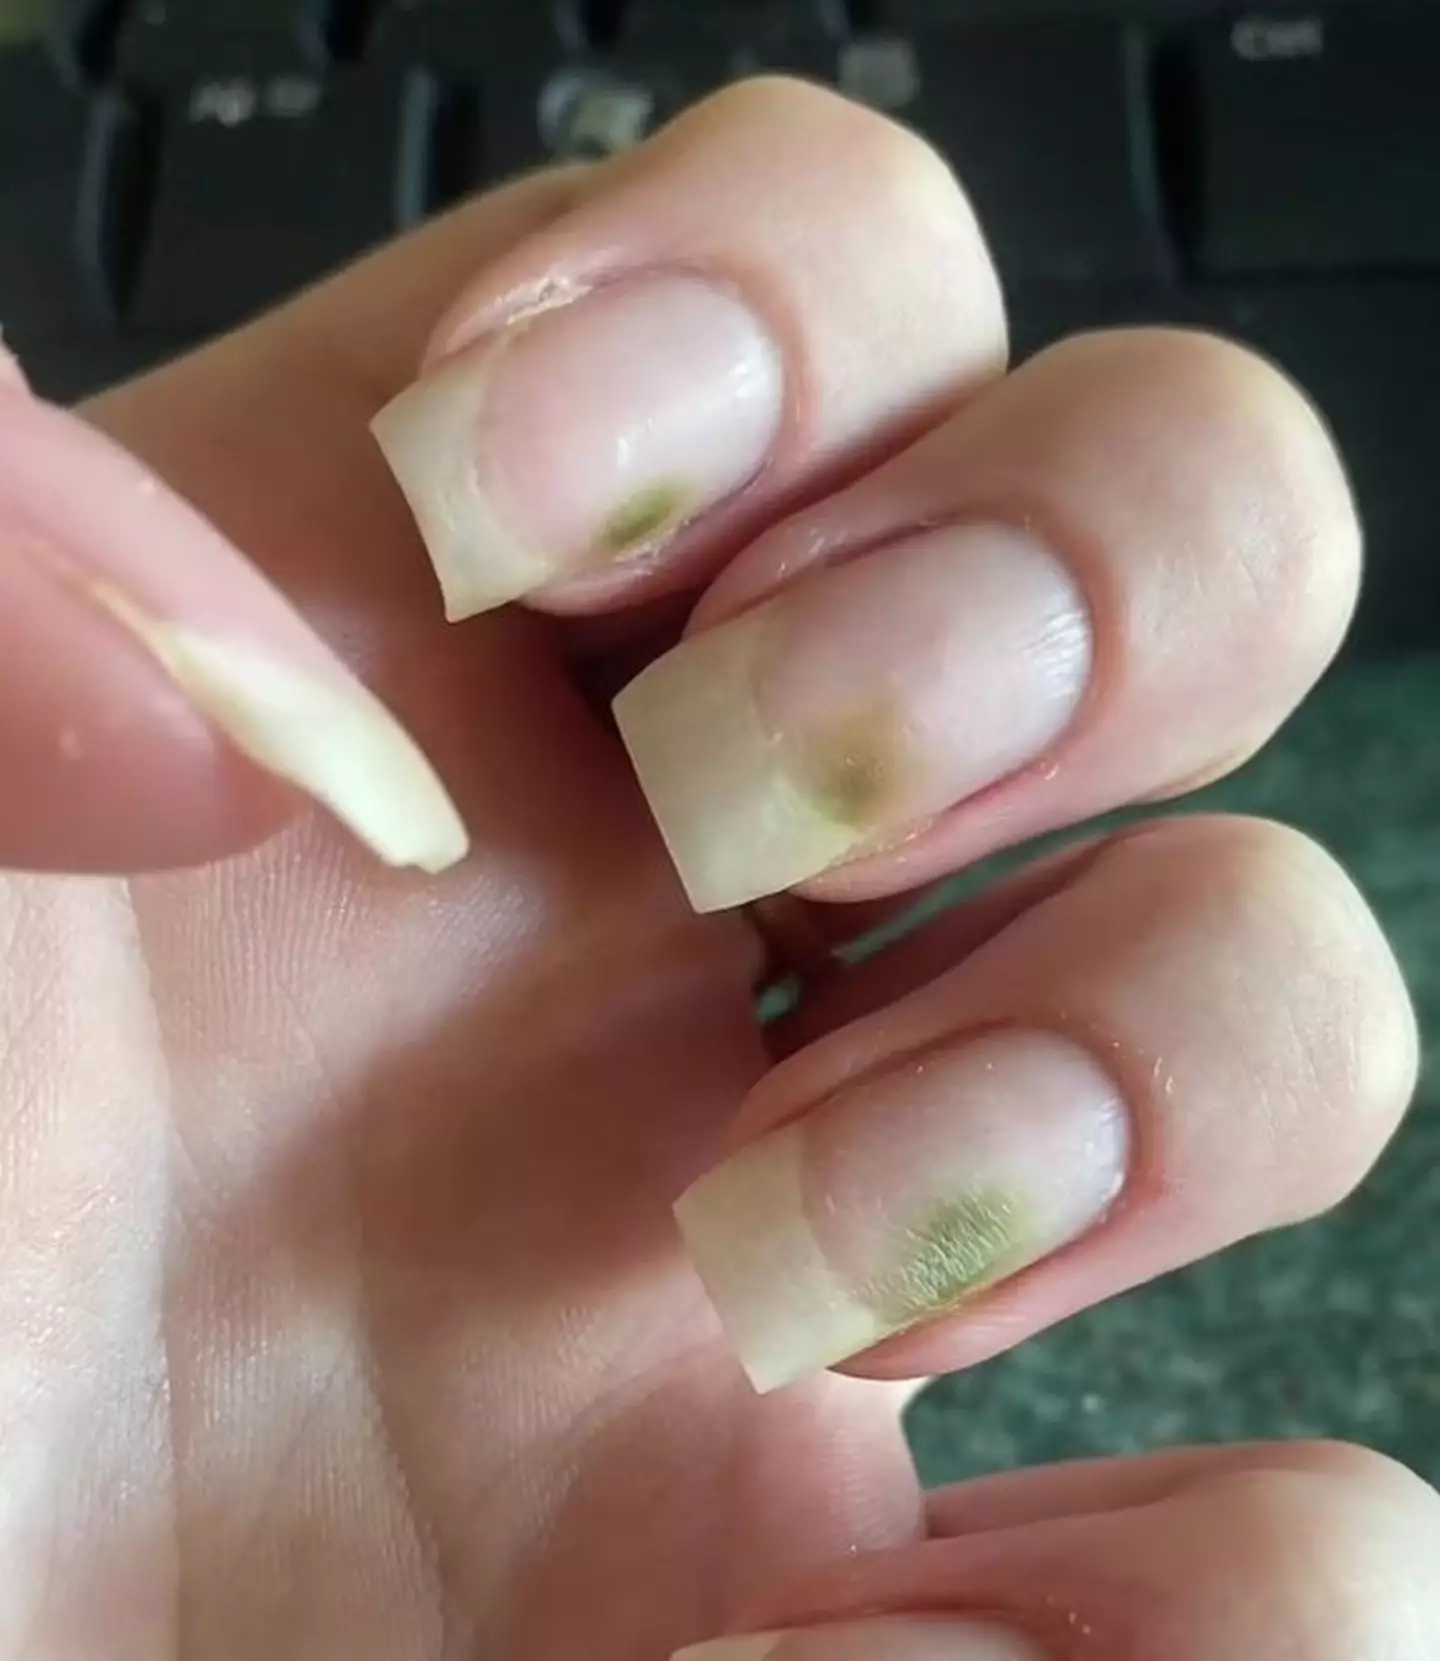 Phoebe's nails turned green.